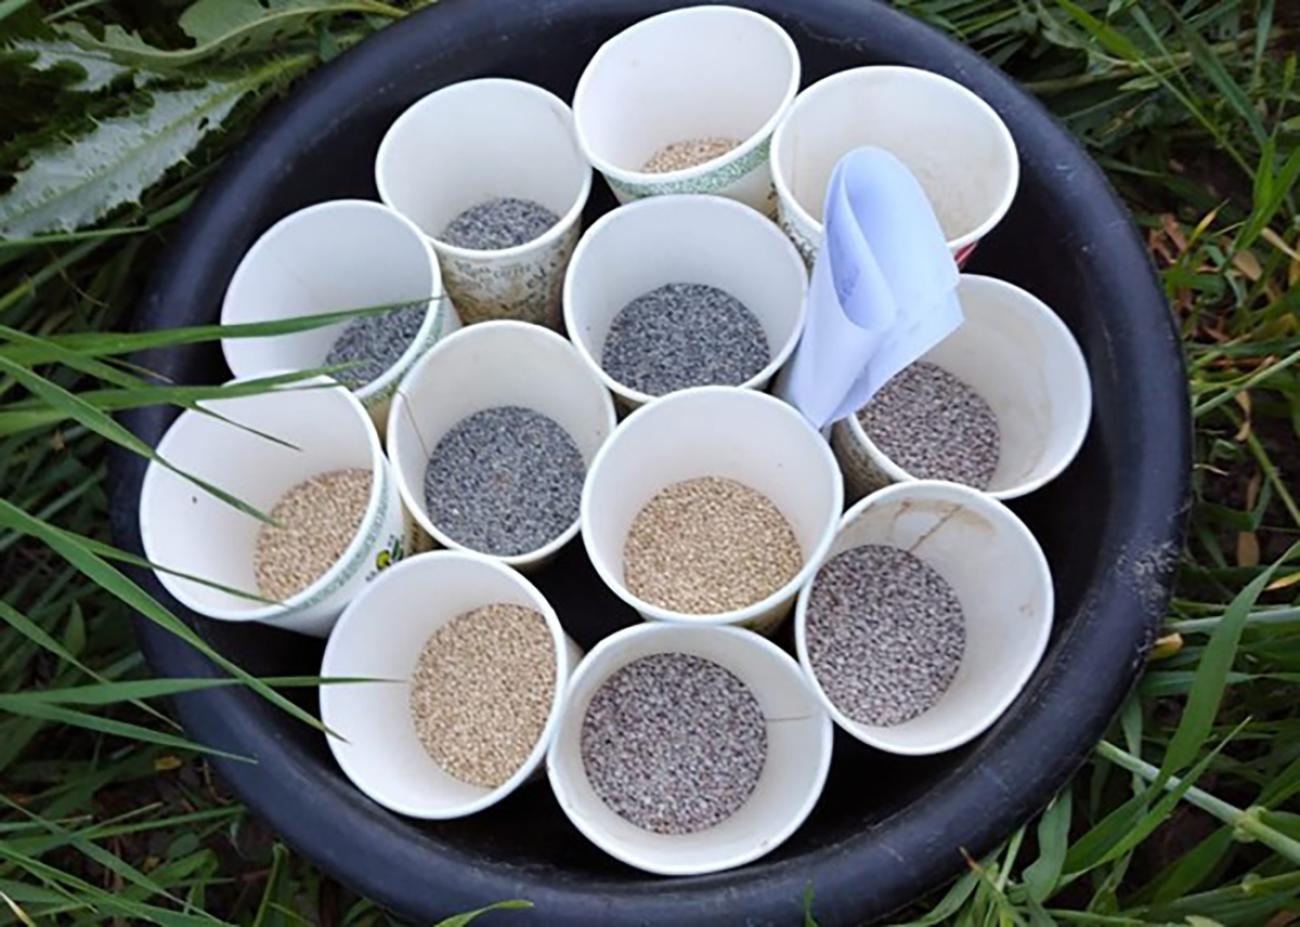 Four varieties of quinoa seeds imported to Armenia.